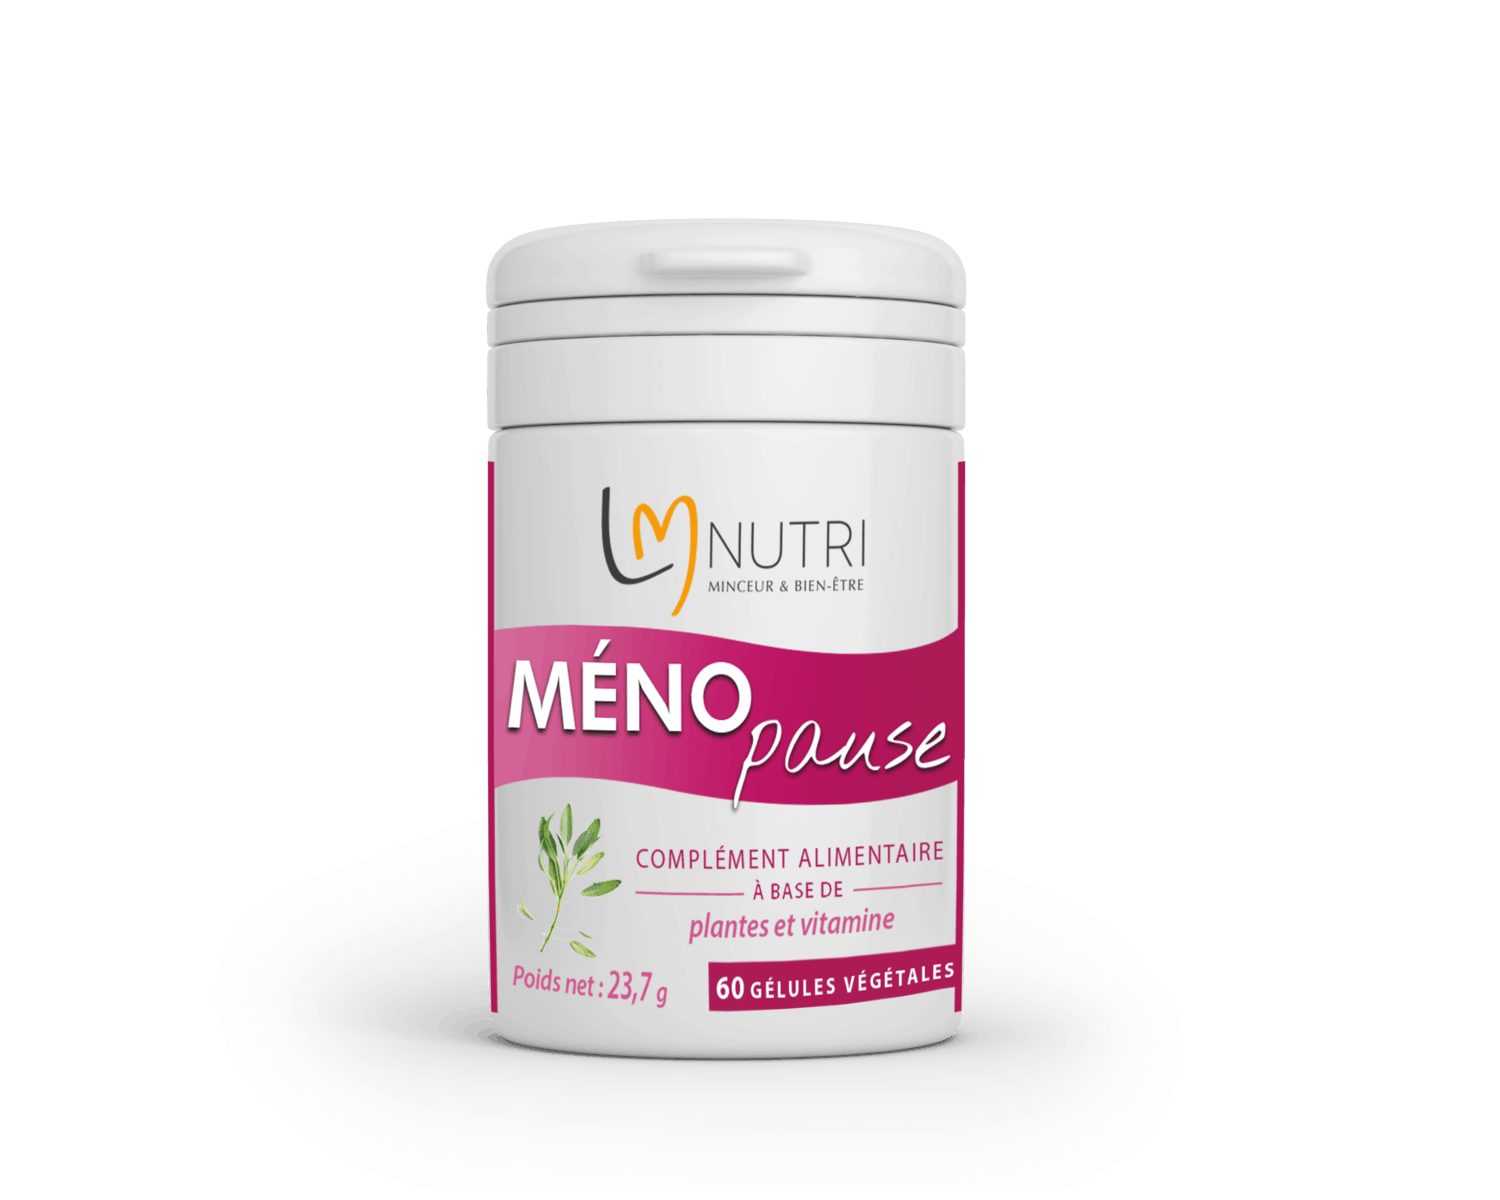 complement alimentaire menopause